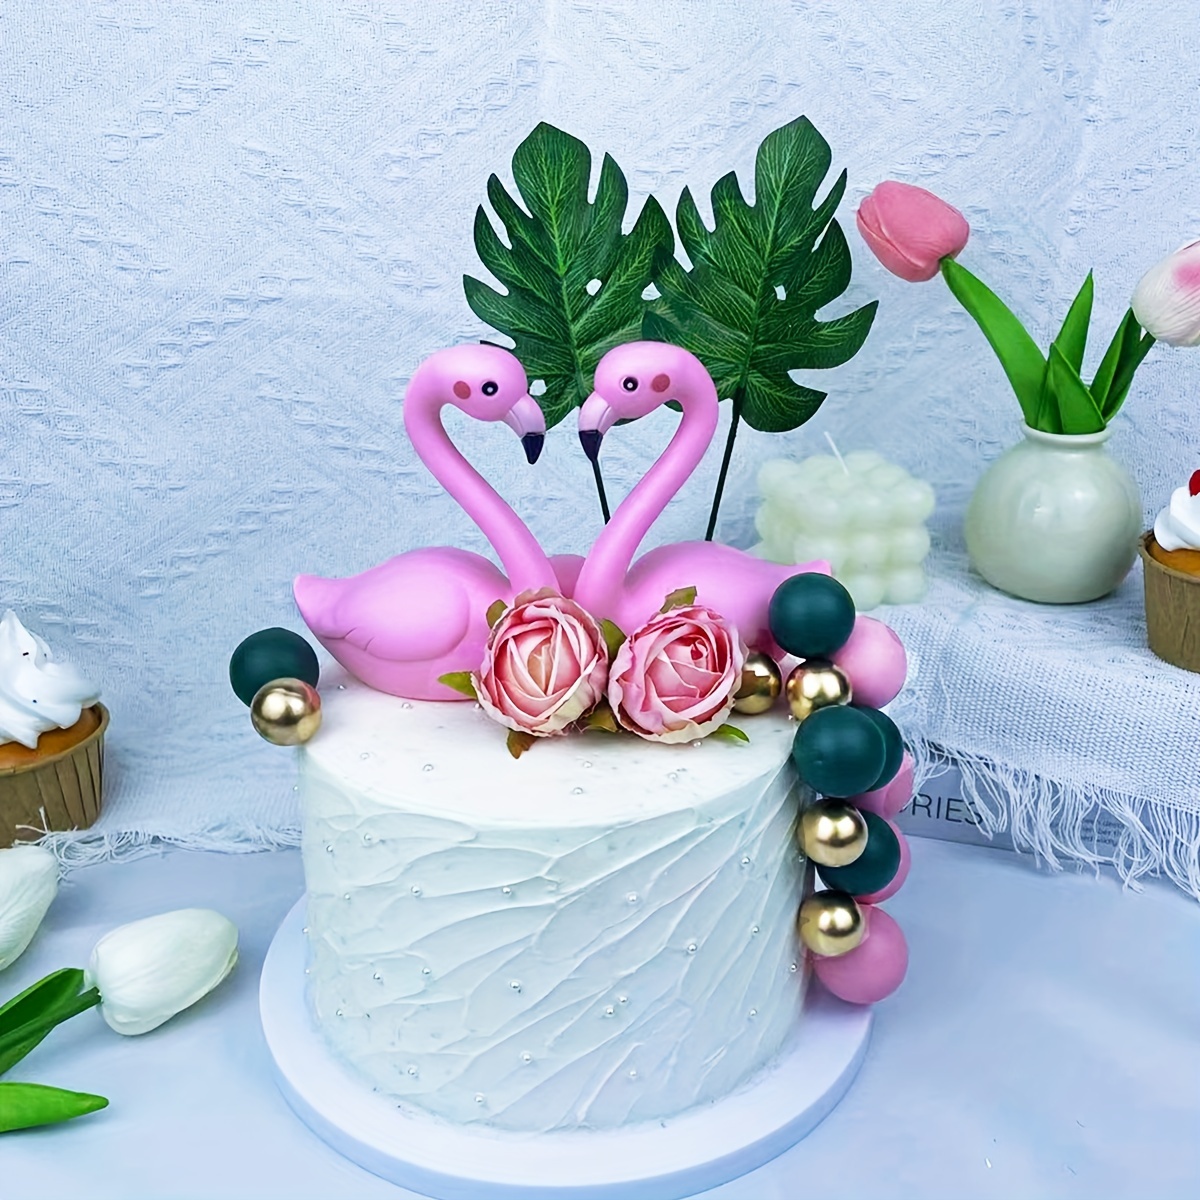 

21pcs Plastic Flamingo Cake Decoration Artificial Flower Palm Leaf Decoration Ball Cake Decoration Suitable For Birthday Party Wedding Summer Hawaiian Theme Party Beach Party And More